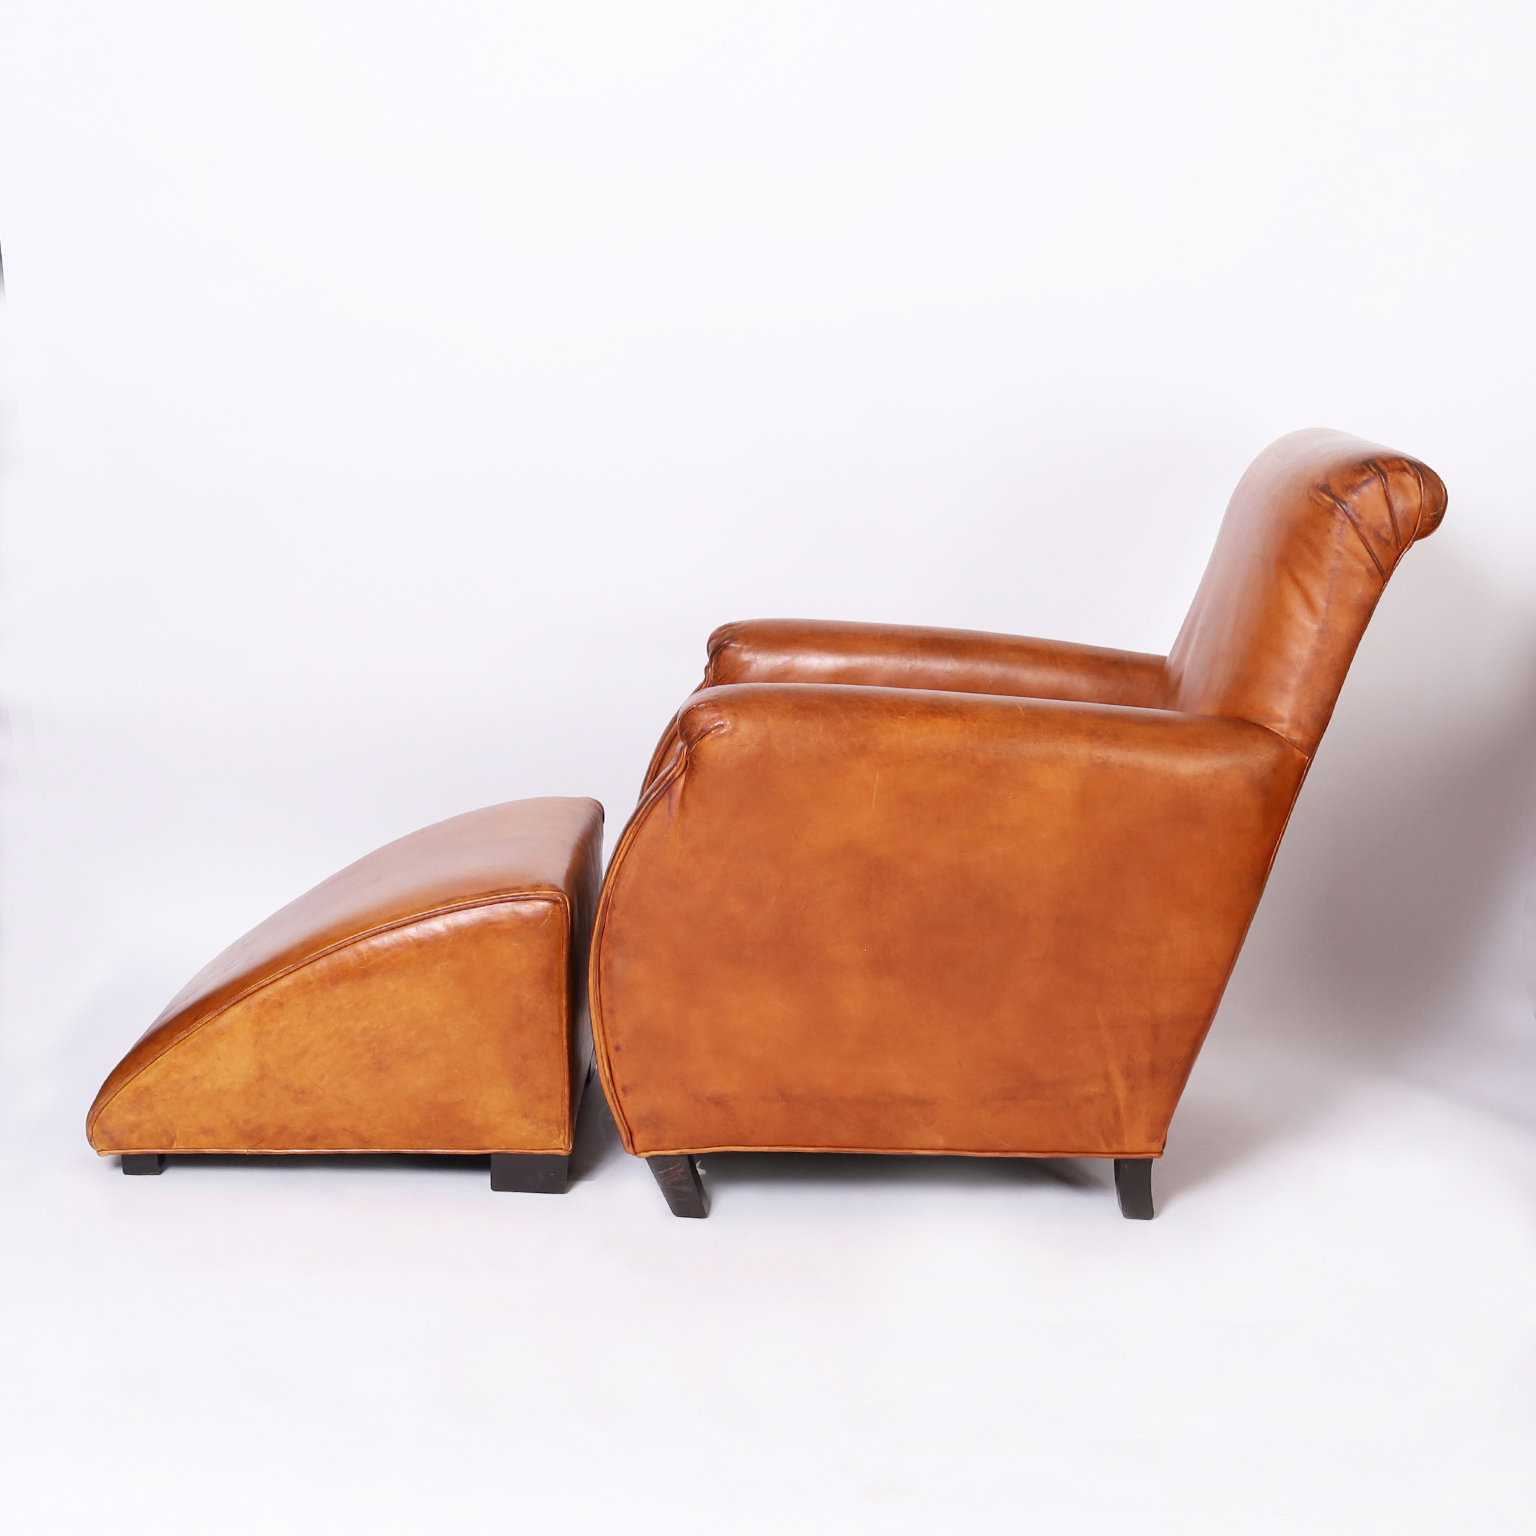 Pair of Vintage Leather Art Deco Style Lounge Chairs and Ottomans by William Allen